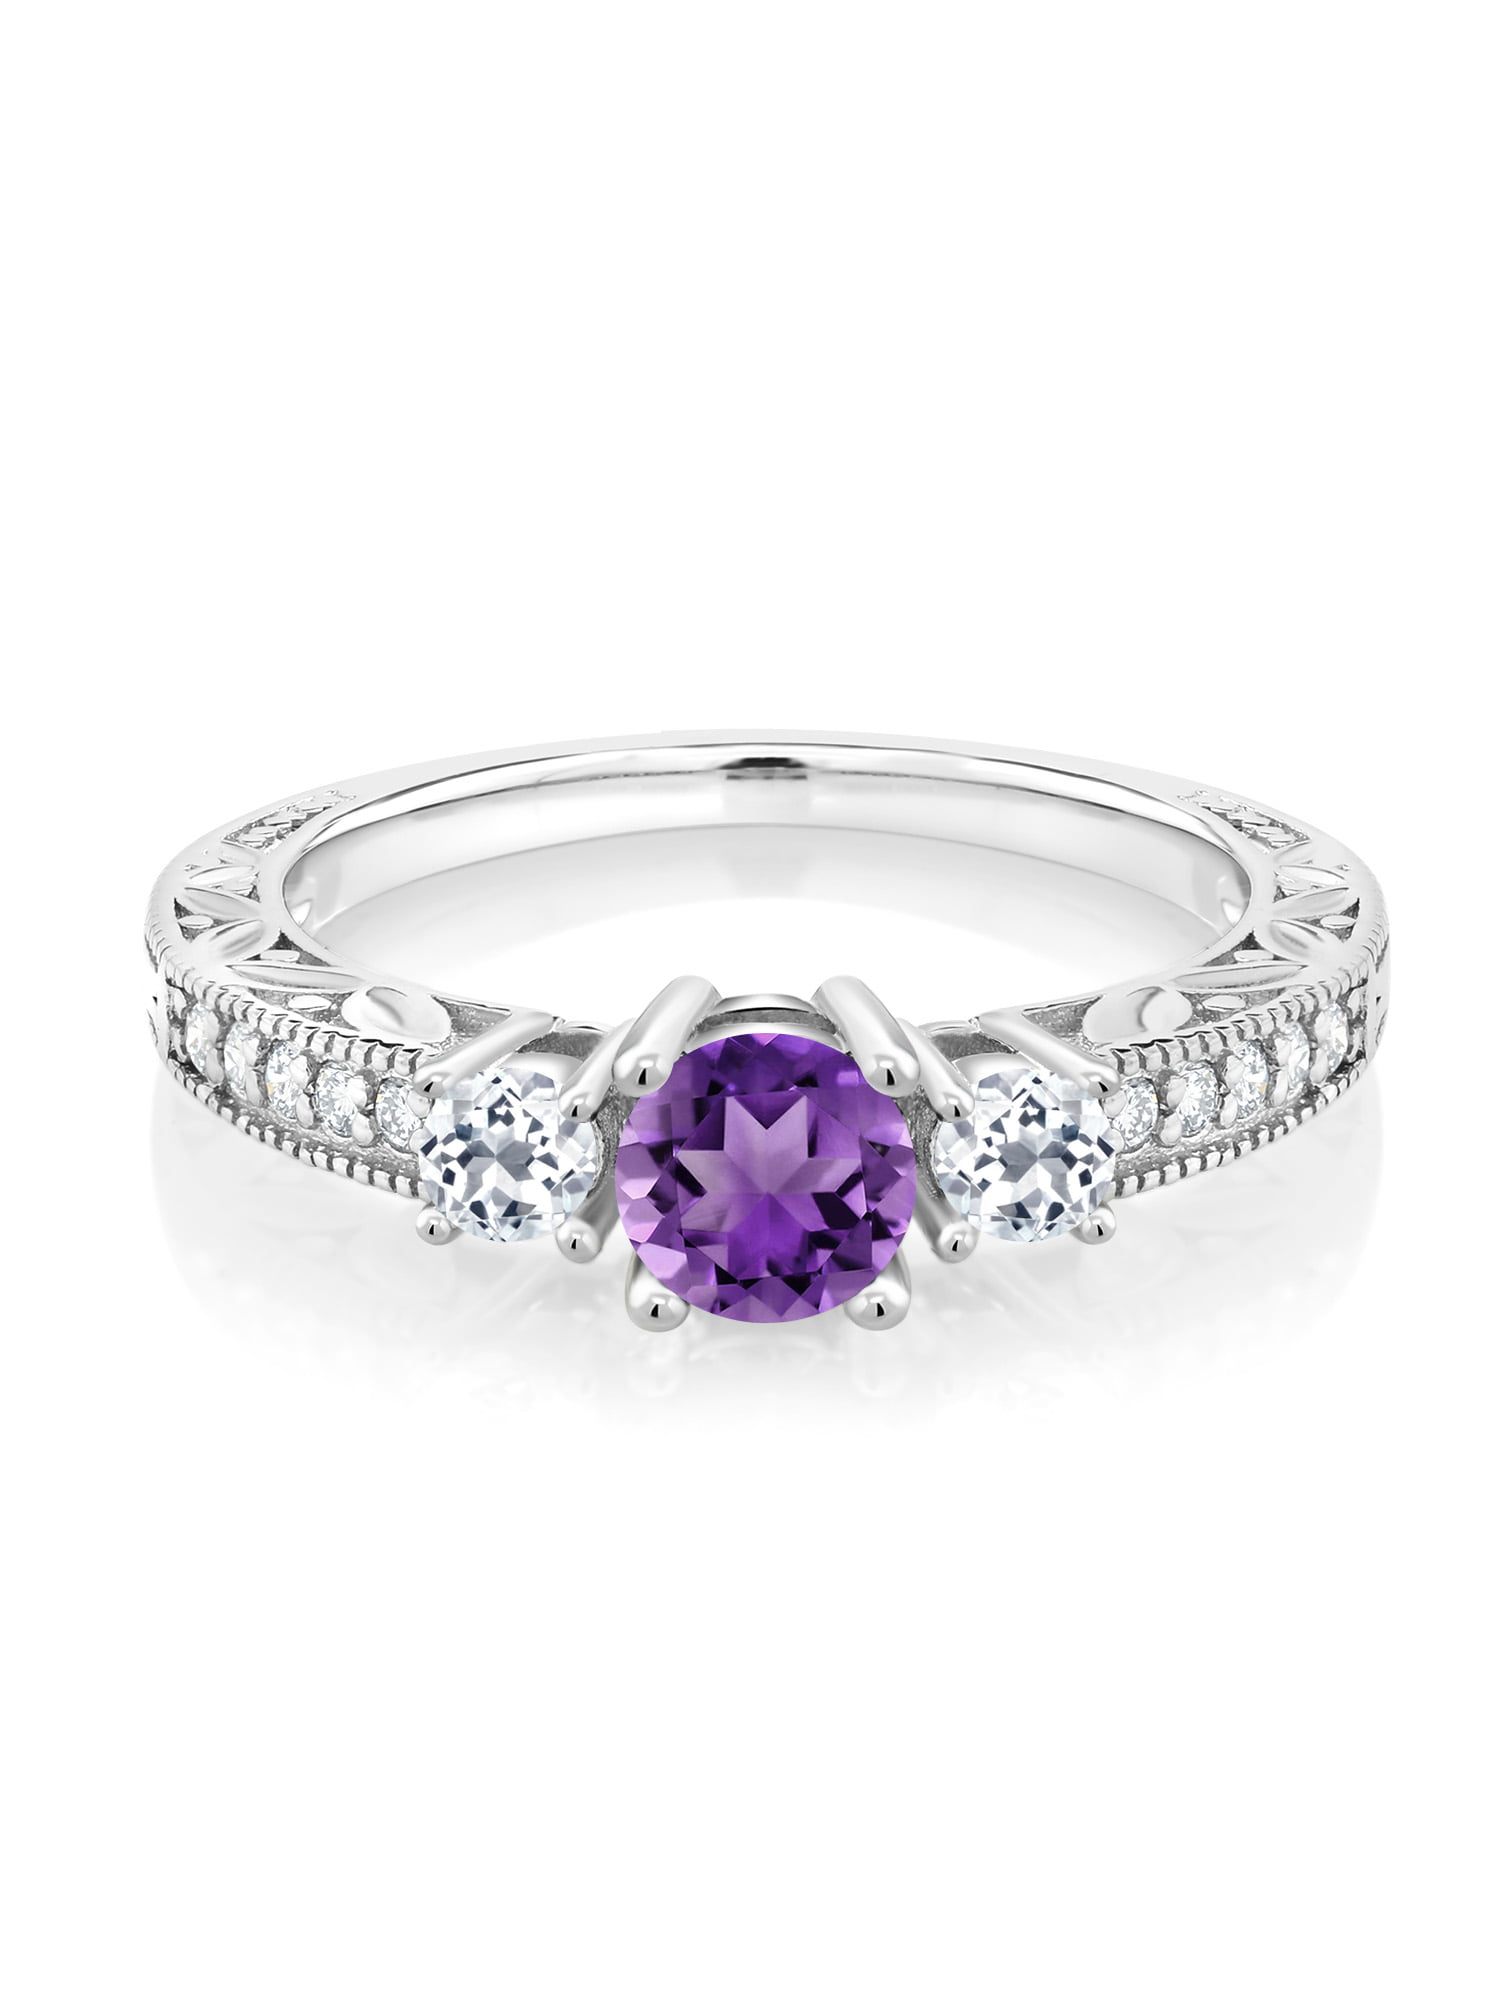 Gem Stone King 0.97 Ct Checkerboard Purple Amethyst White Created Sapphire 925 Silver Ring